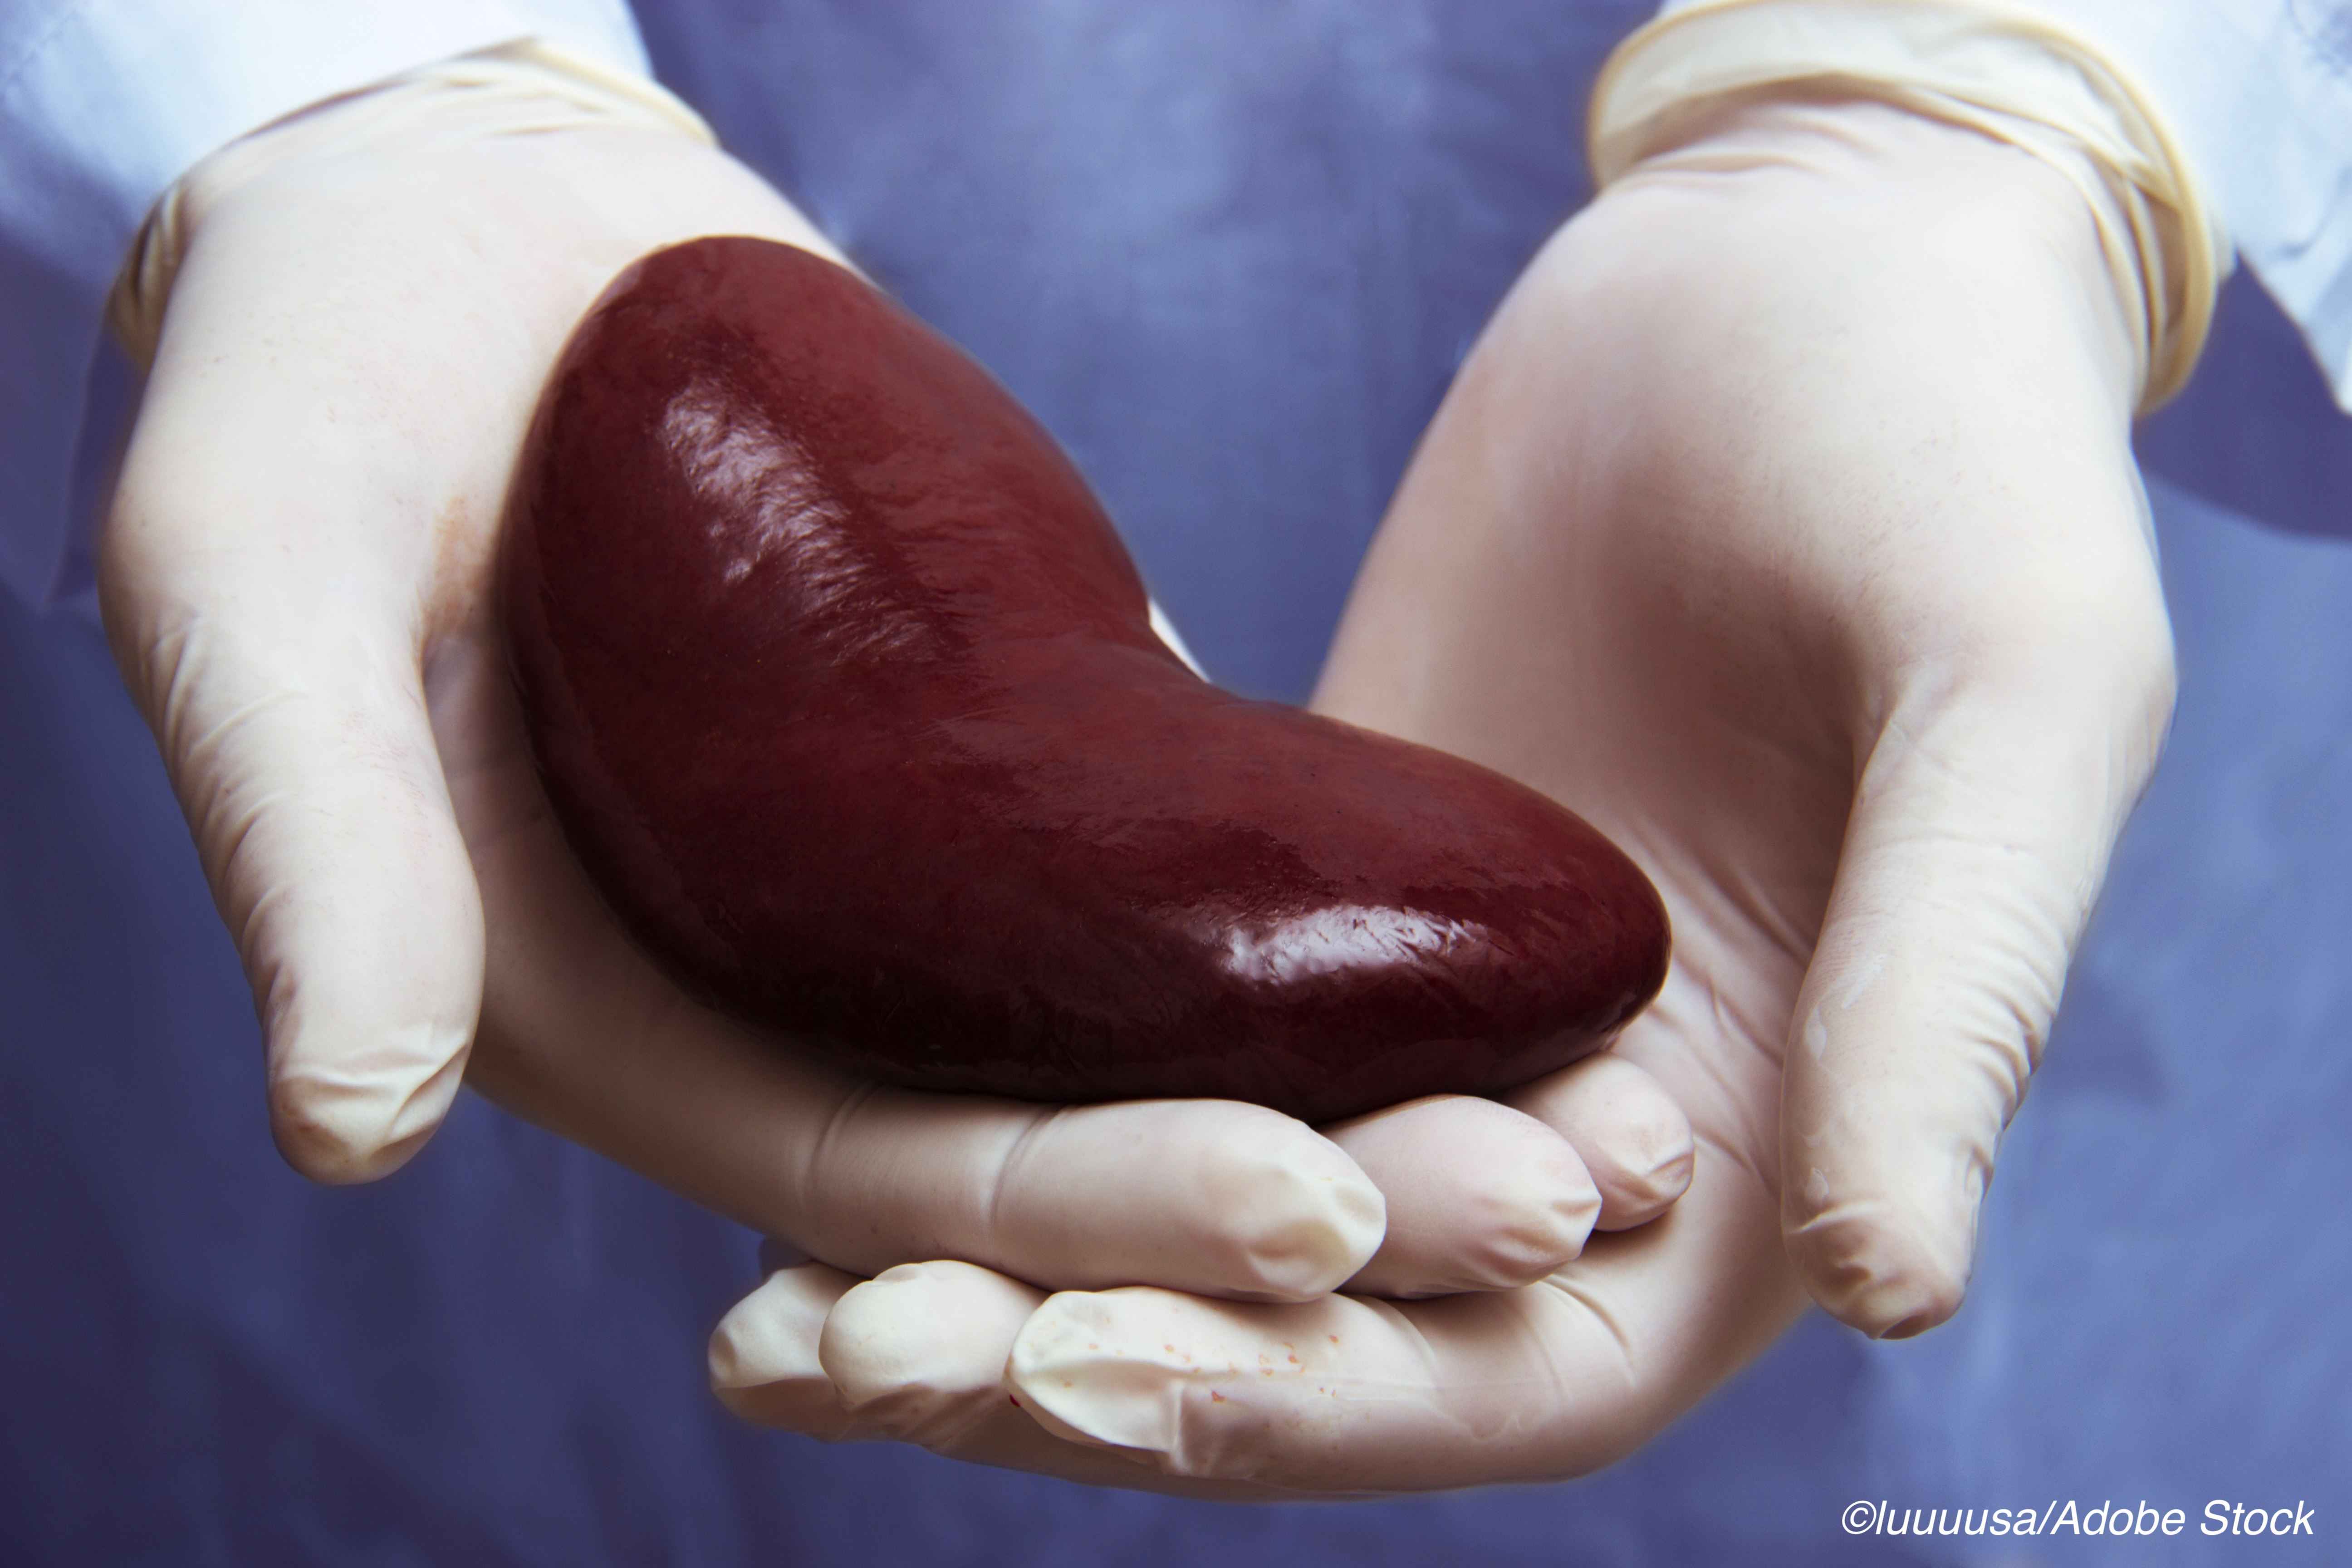 Long-Term Corticosteroids Not Necessary After Kidney Transplant